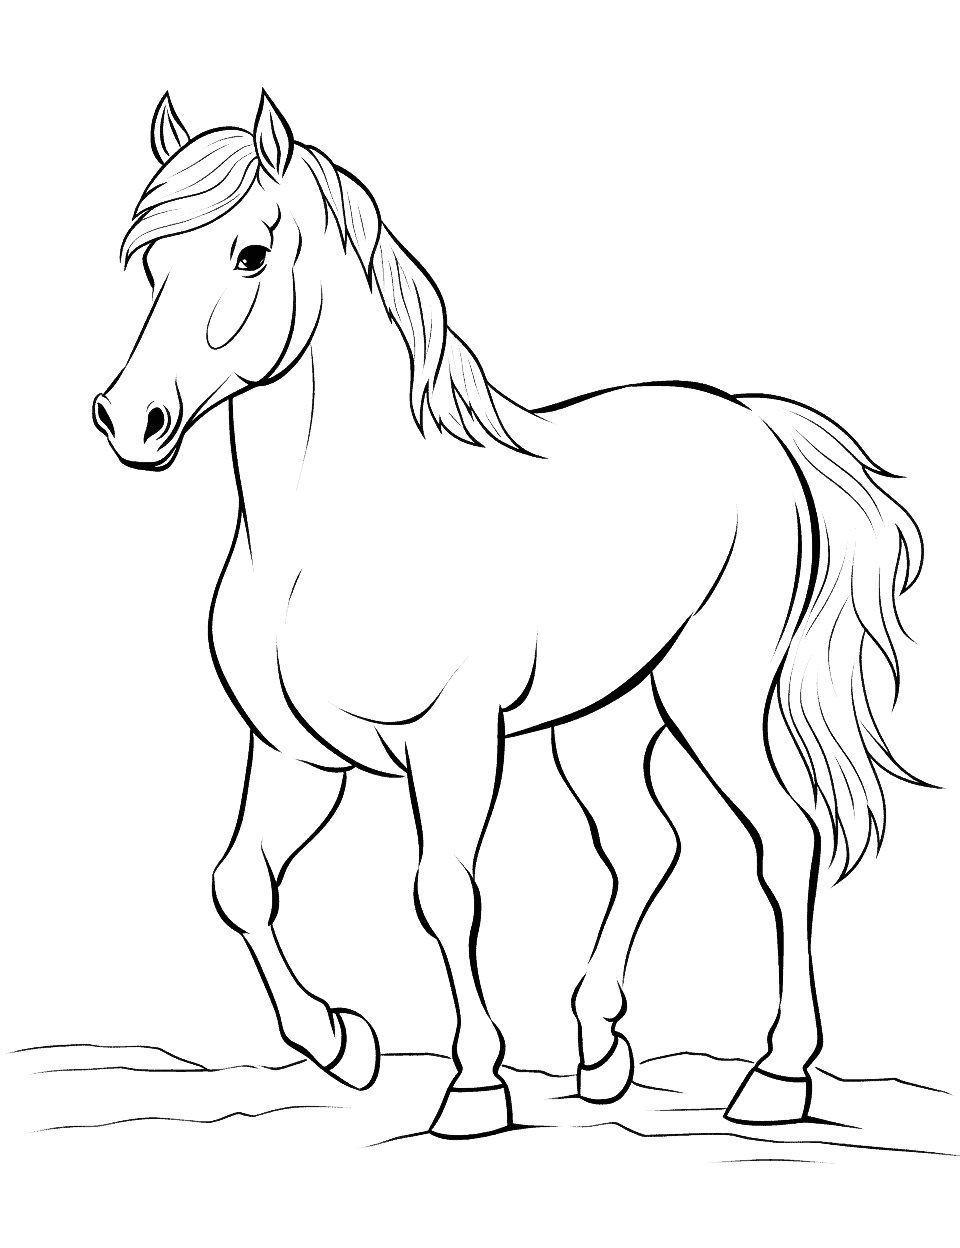 Basic Horse Drawing Coloring Page - A step-by-step horse drawing to color, great for budding artists.